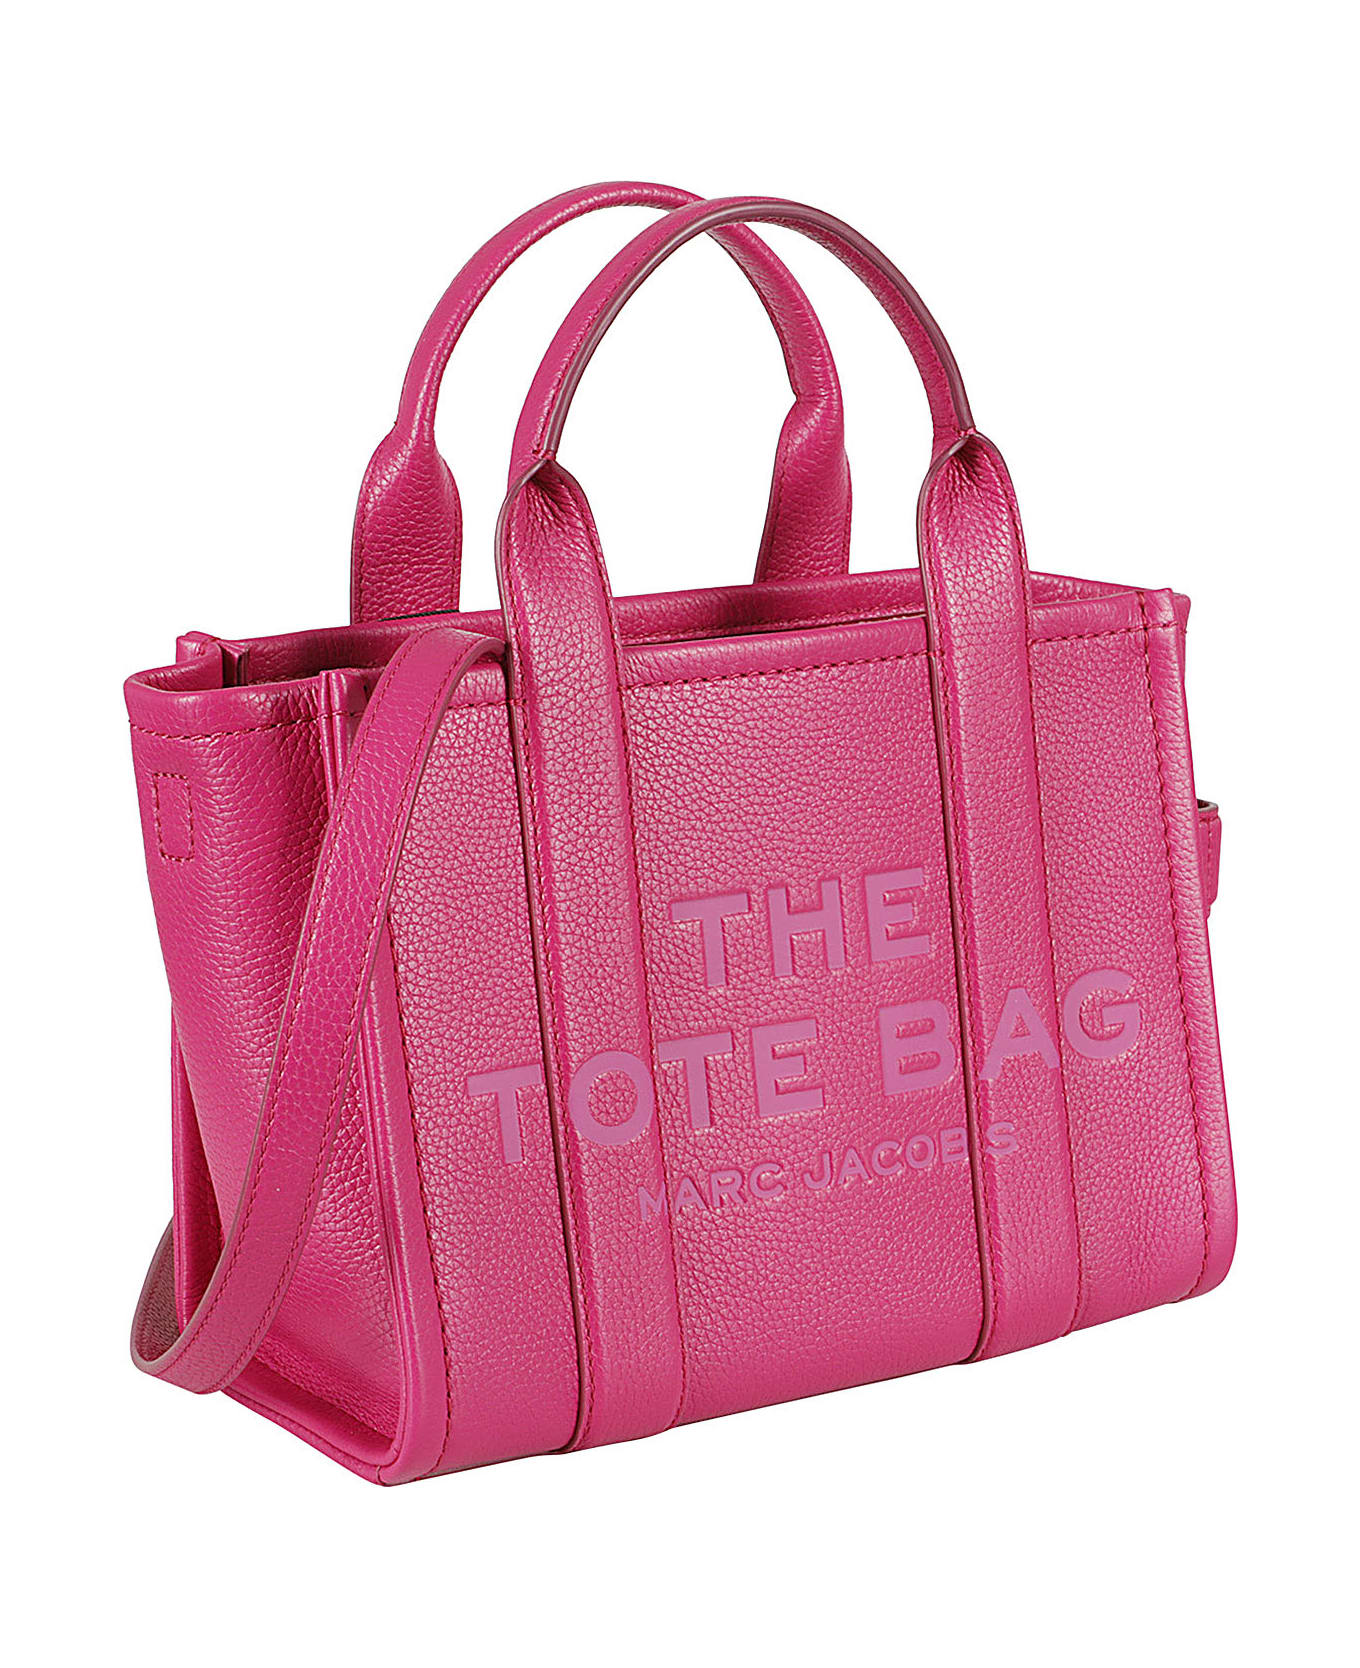 Marc Jacobs The Small Tote - Lipstick Pink